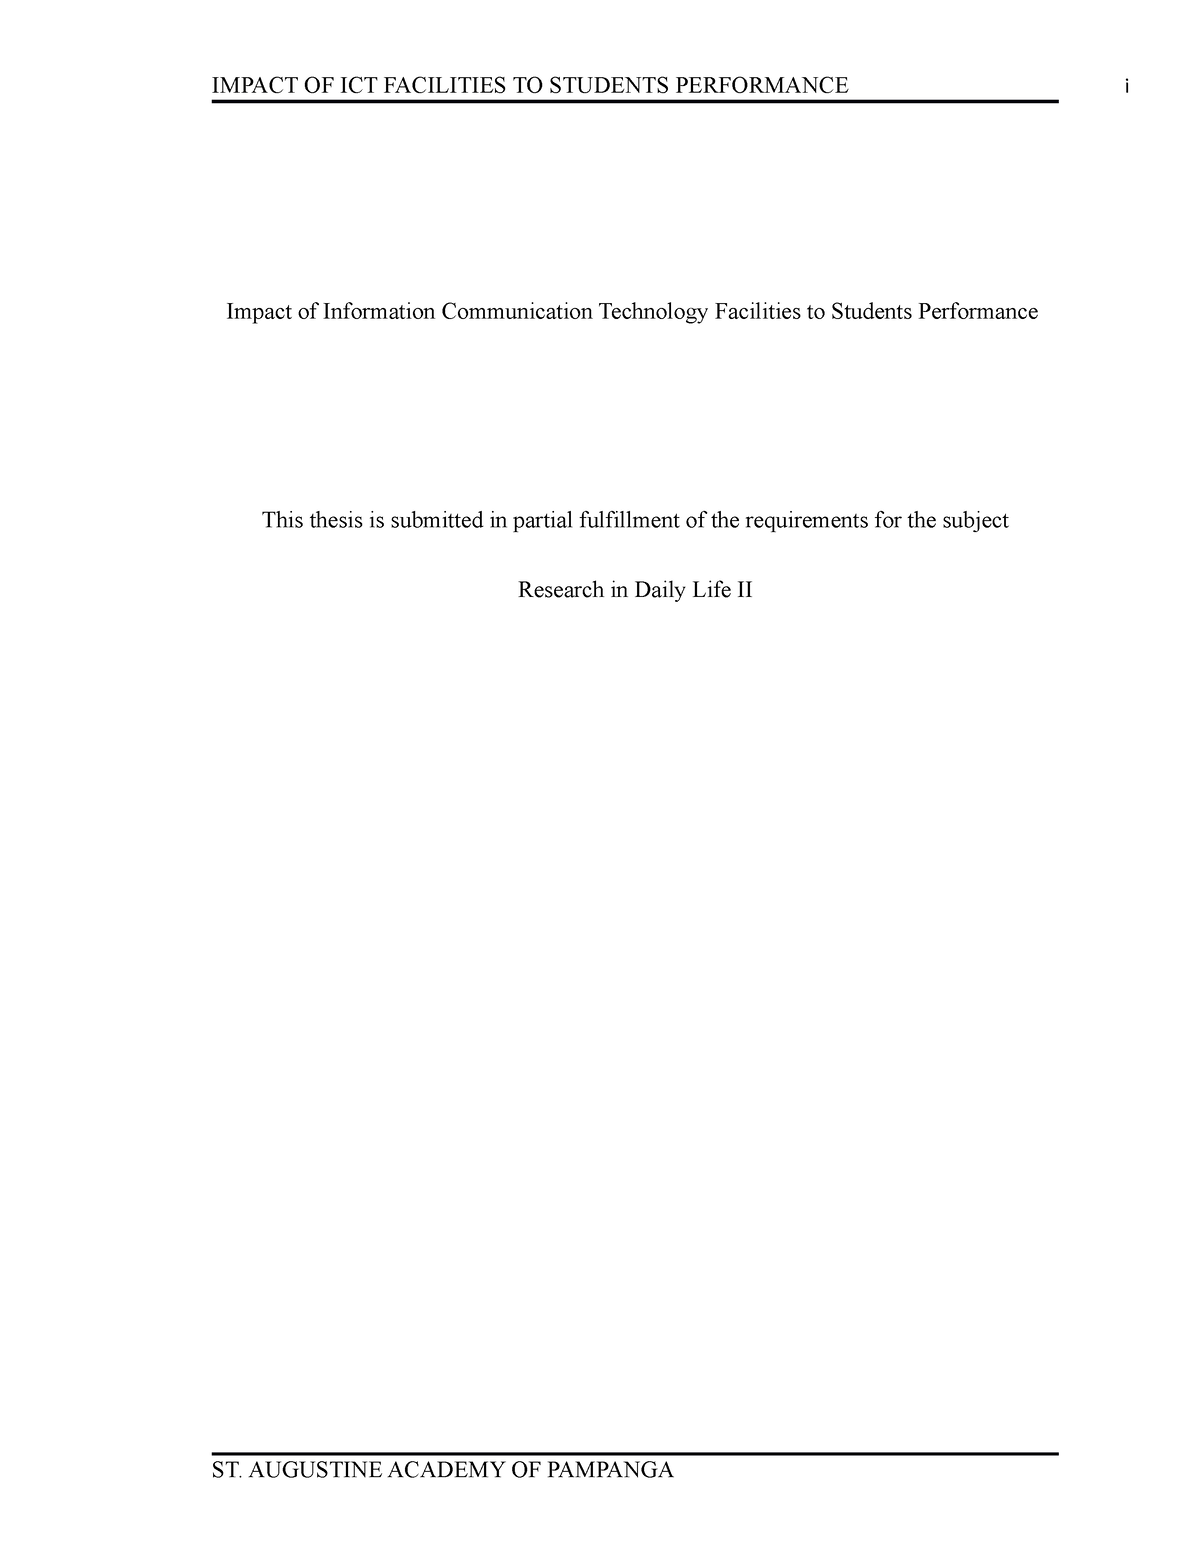 information technology thesis sample